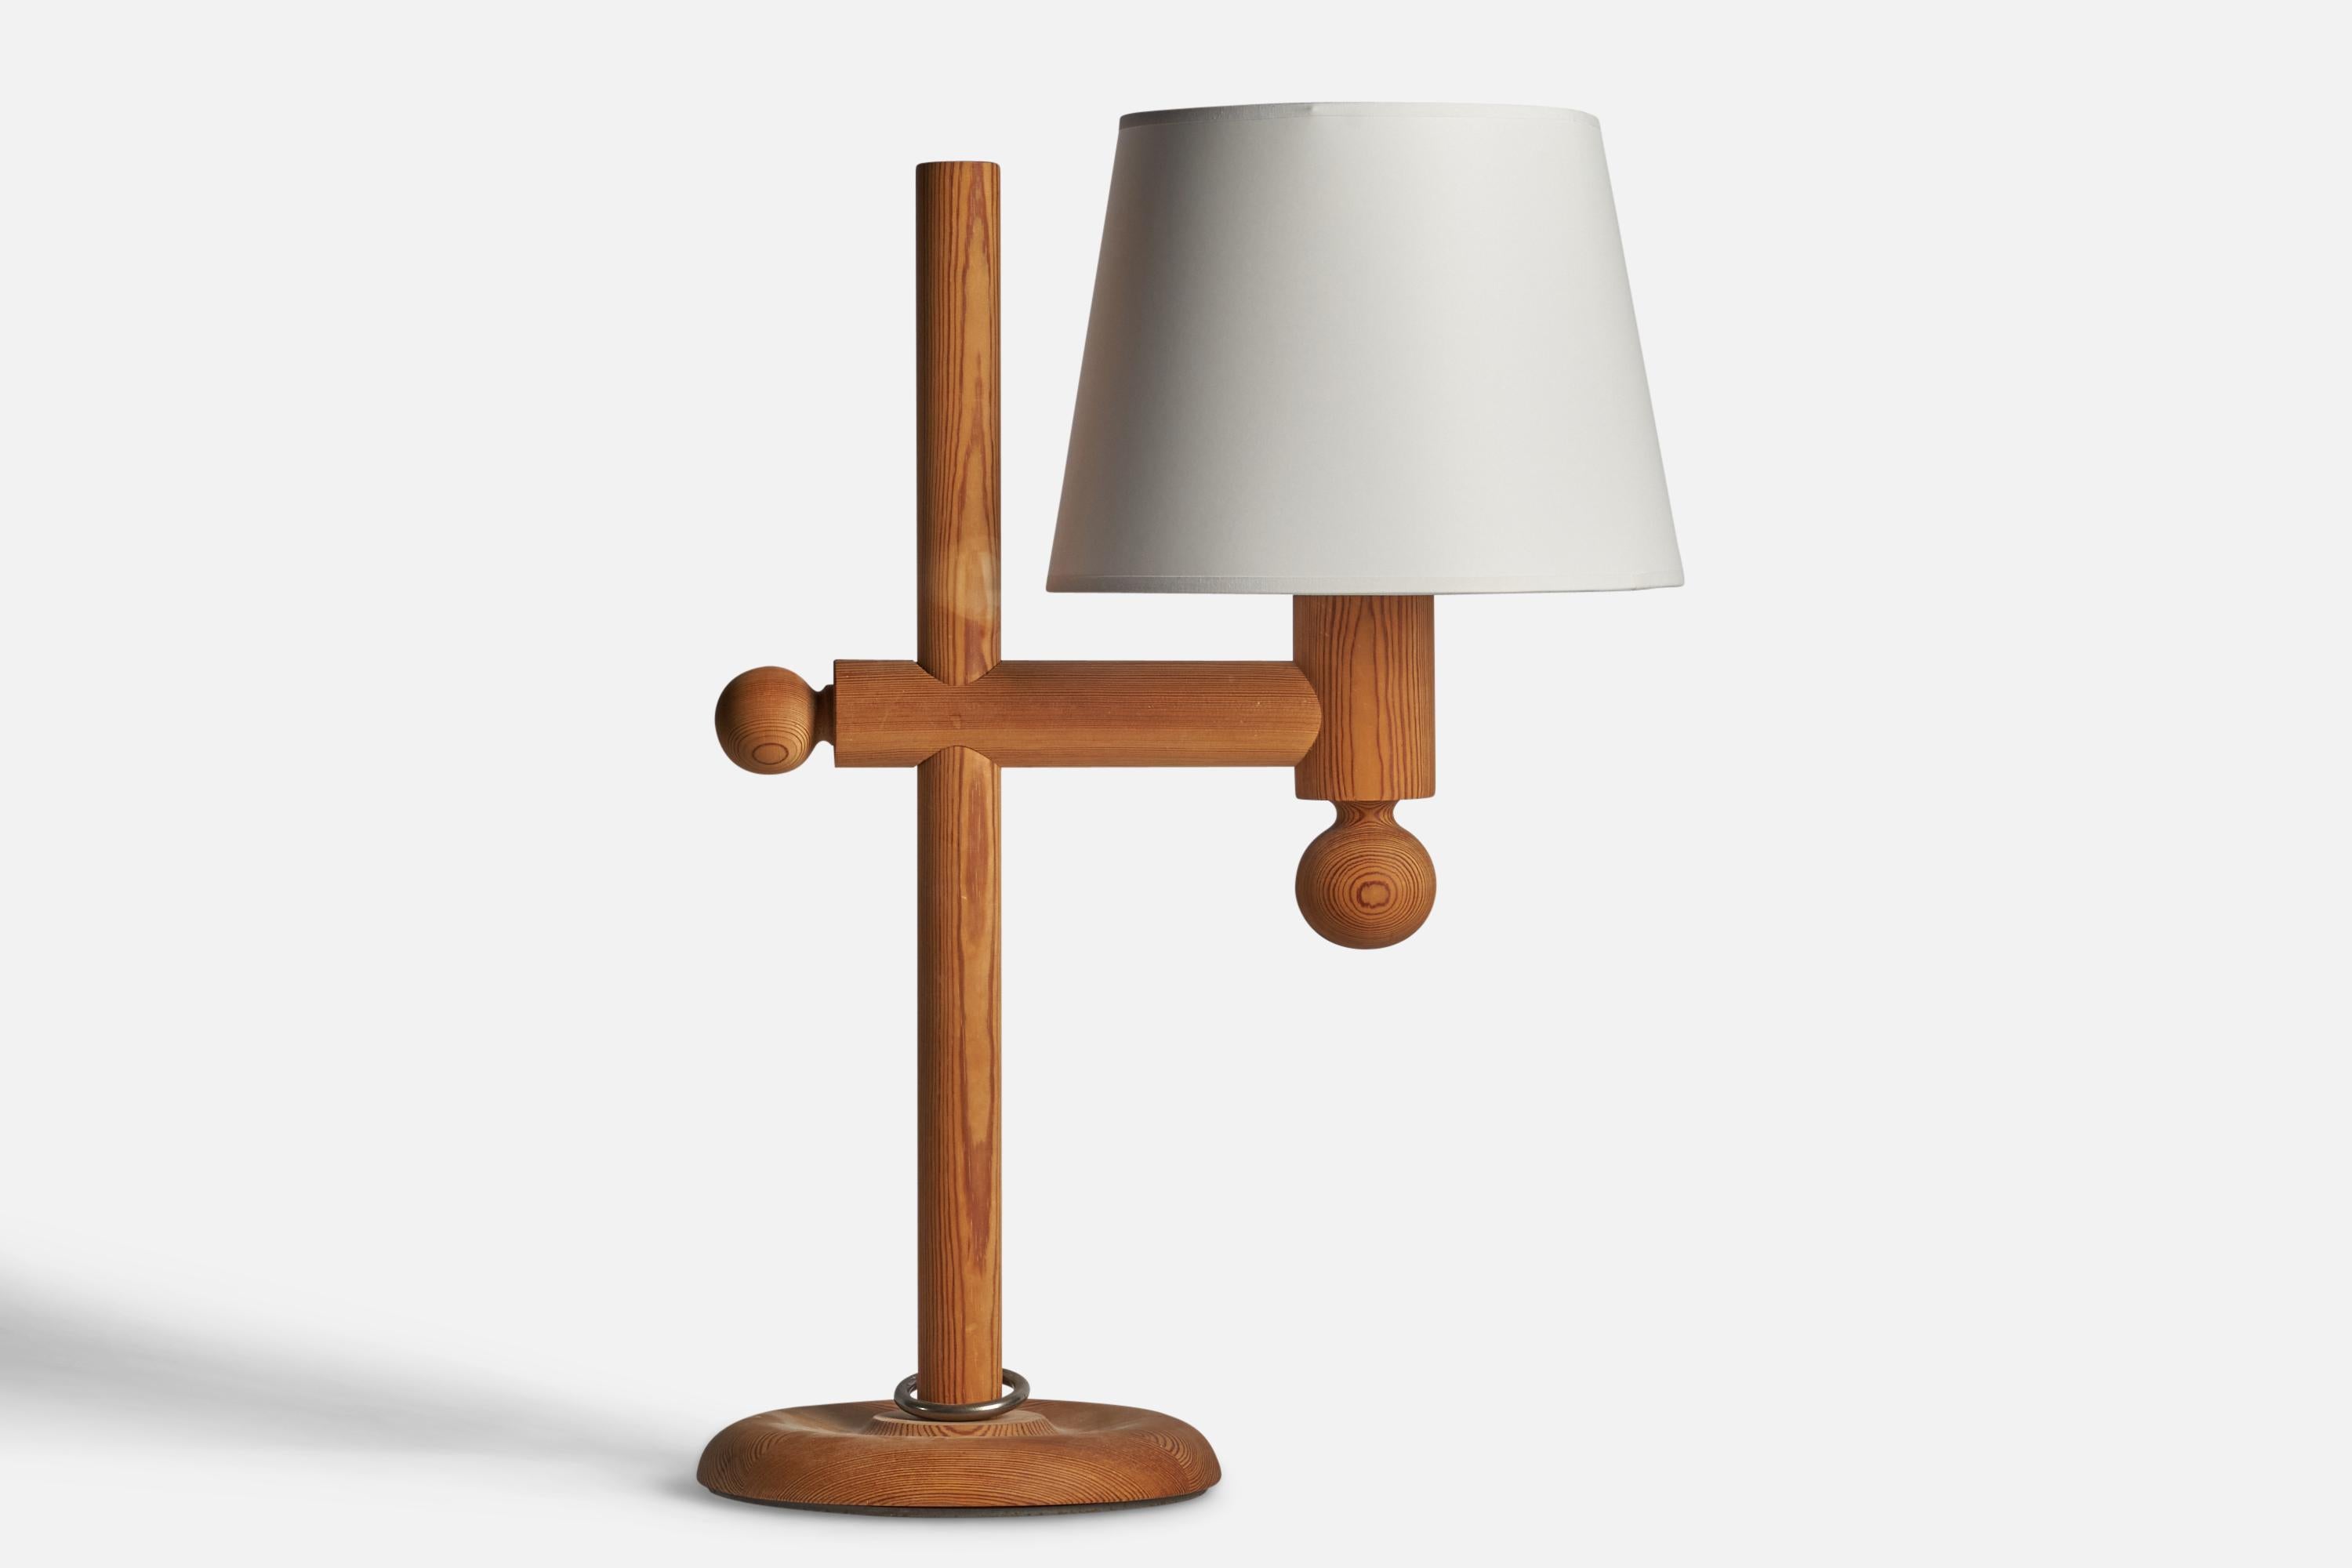 A pine table lamp designed by Uno Kristiansson and produced by Luxus Vittsjö, Sweden, 1970s.

Dimensions of Lamp (inches): 25.25” H x 9.75” W x 13.5” D

Dimensions of Shade (inches): 9” Top Diameter x 12” Bottom Diameter x 9” H 

Dimensions of Lamp